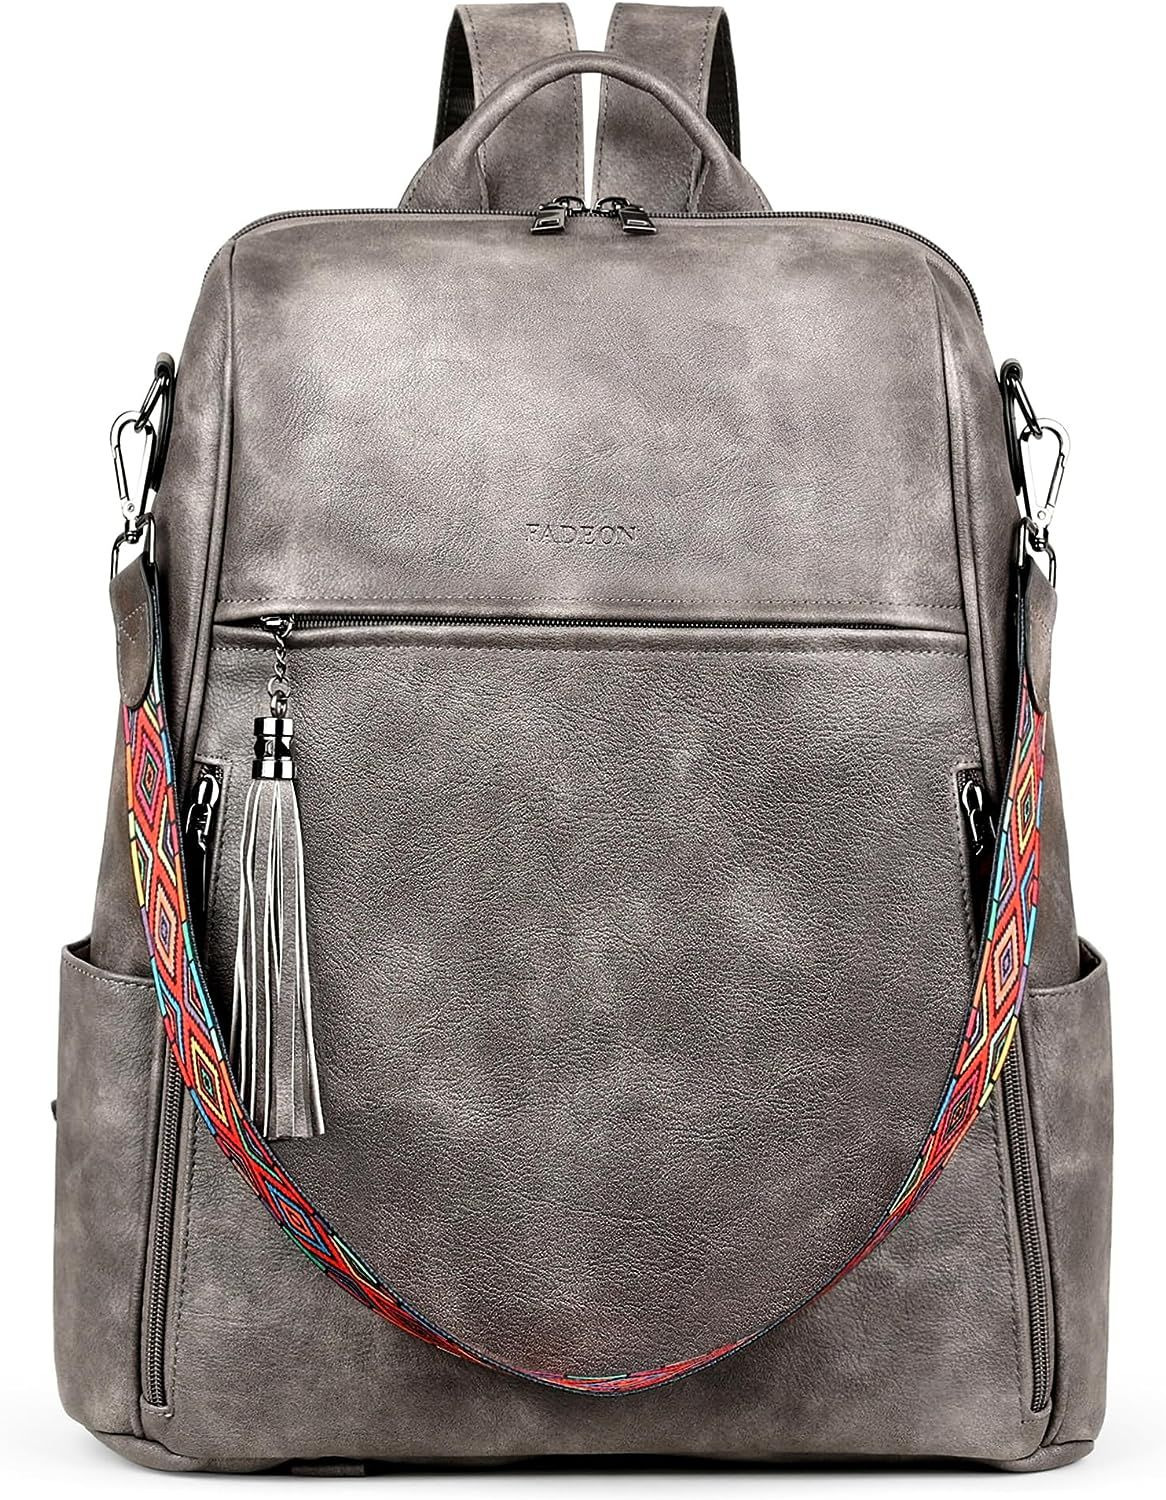 FADEON Laptop Backpack Large (15.5-in Height), Charcoal Grey Retro Style 